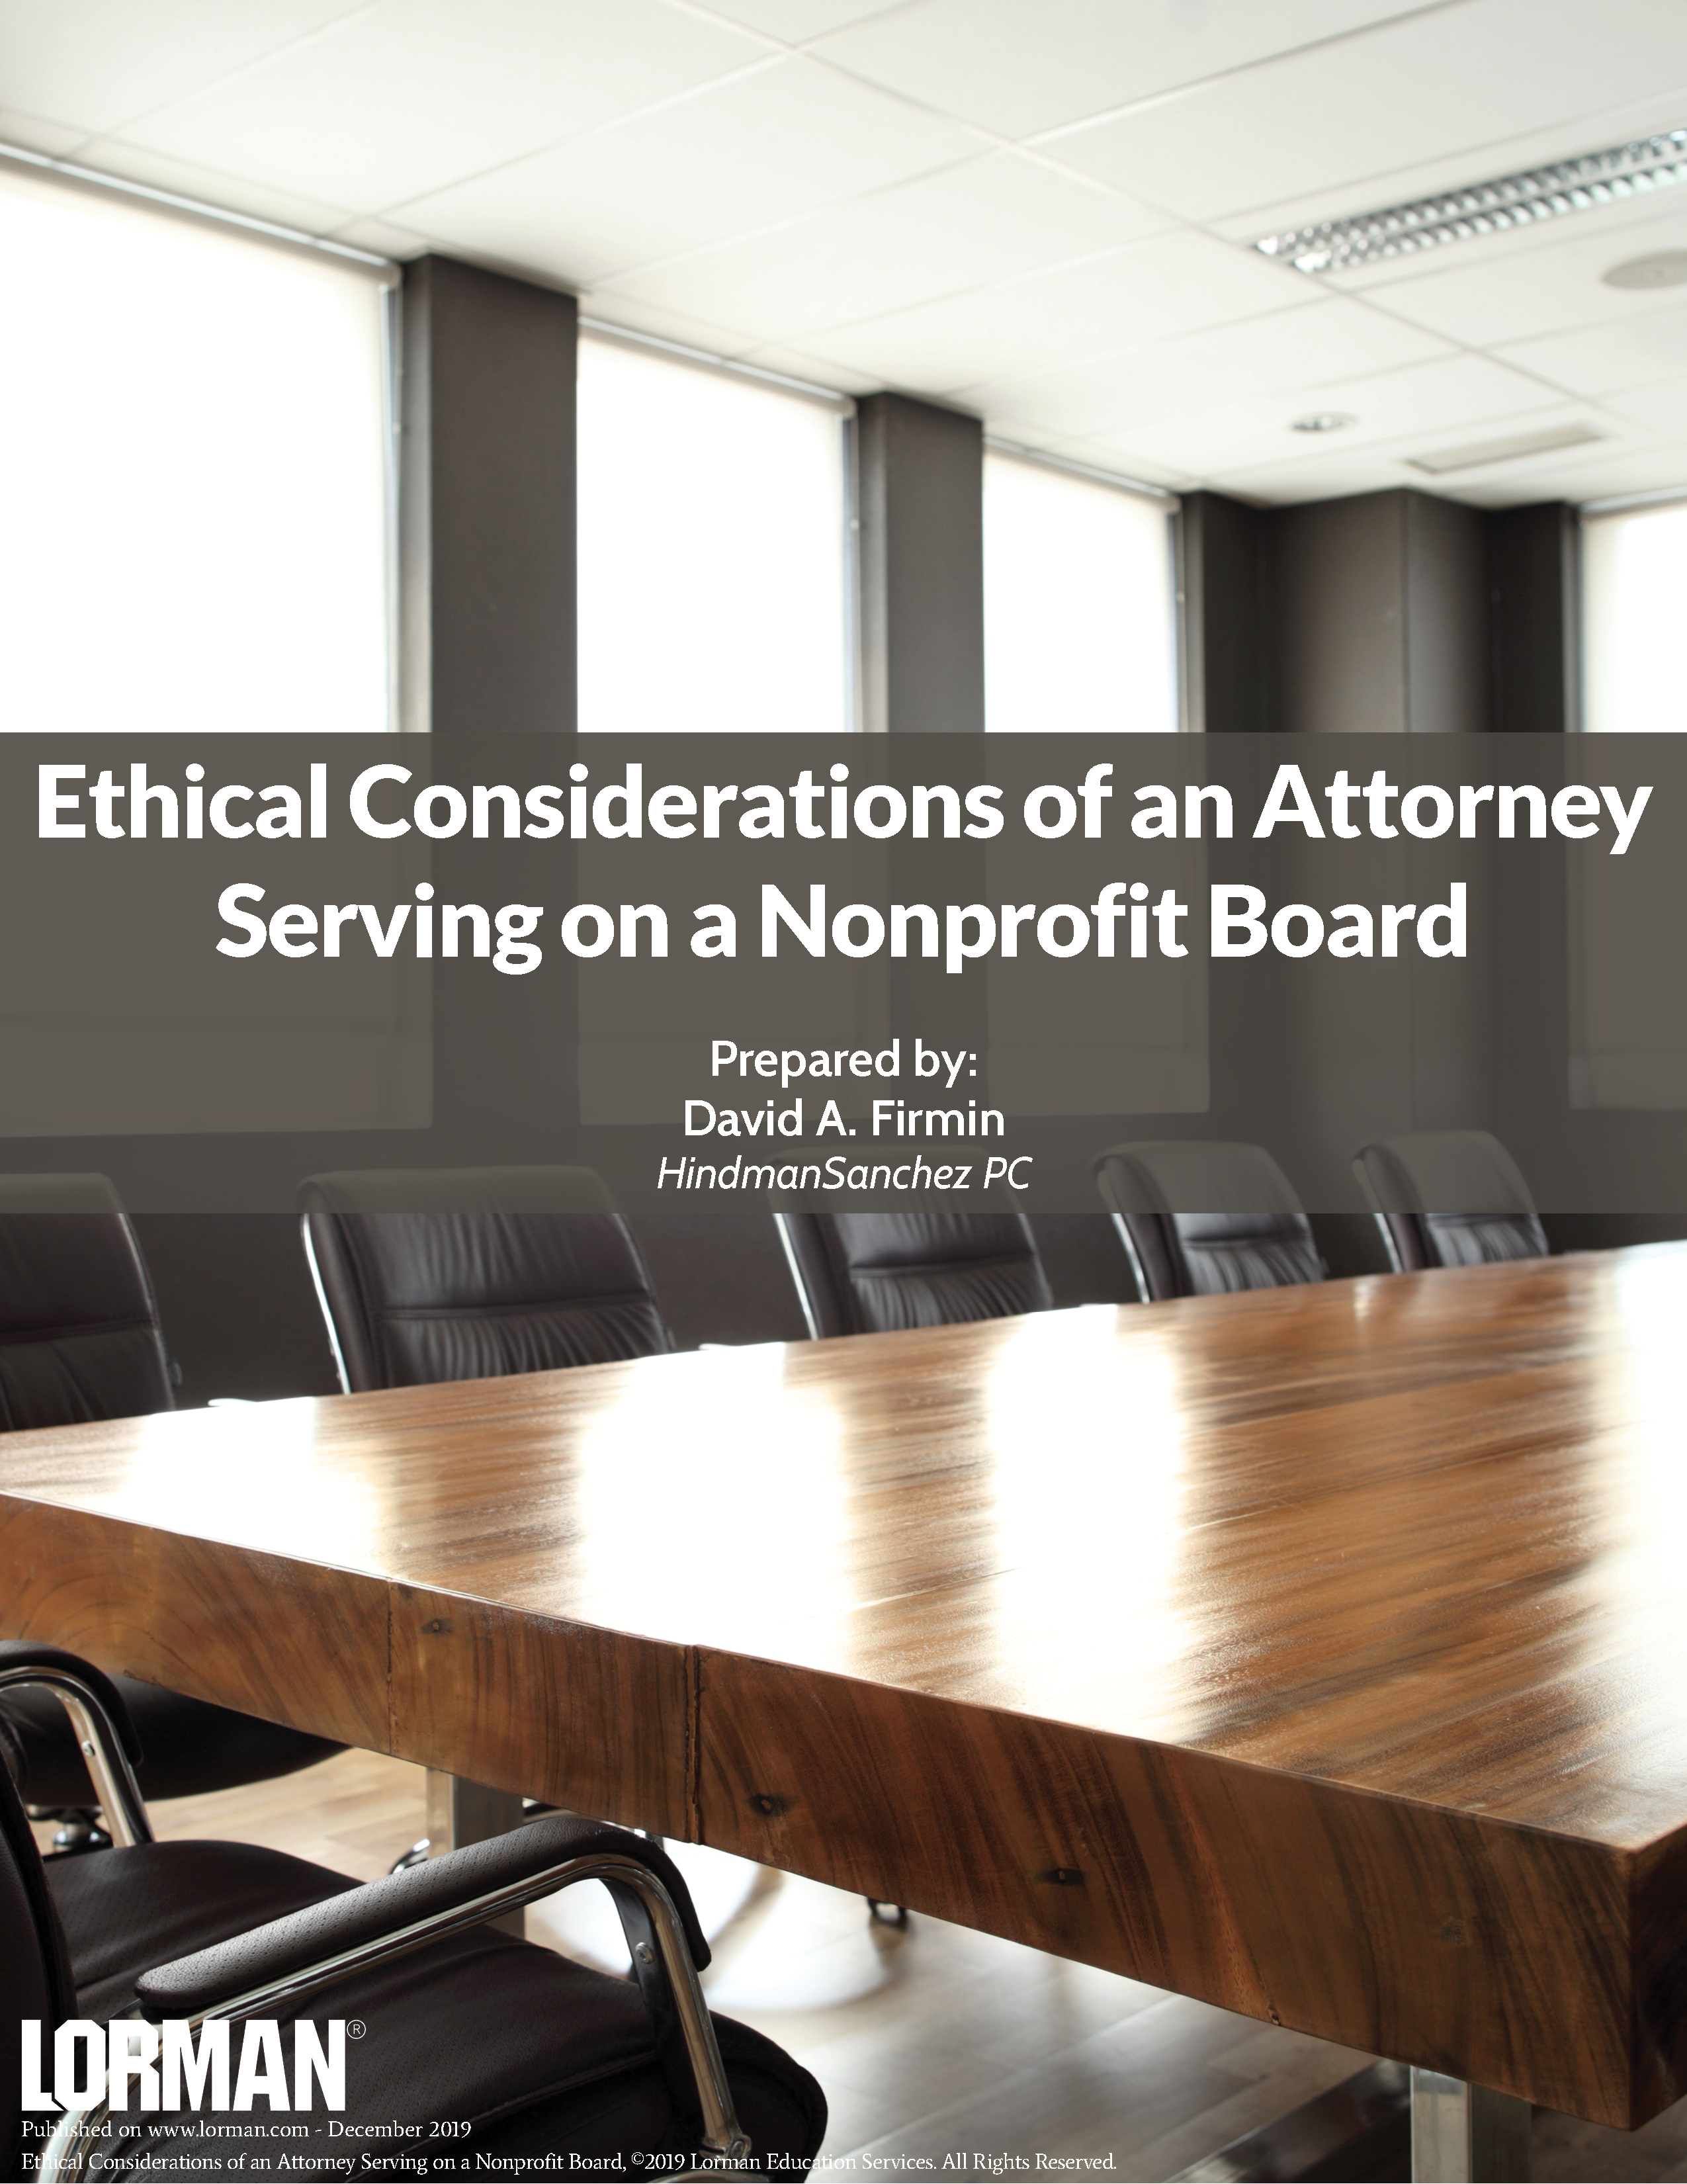 Ethical Considerations of an Attorney Serving on a Nonprofit Board